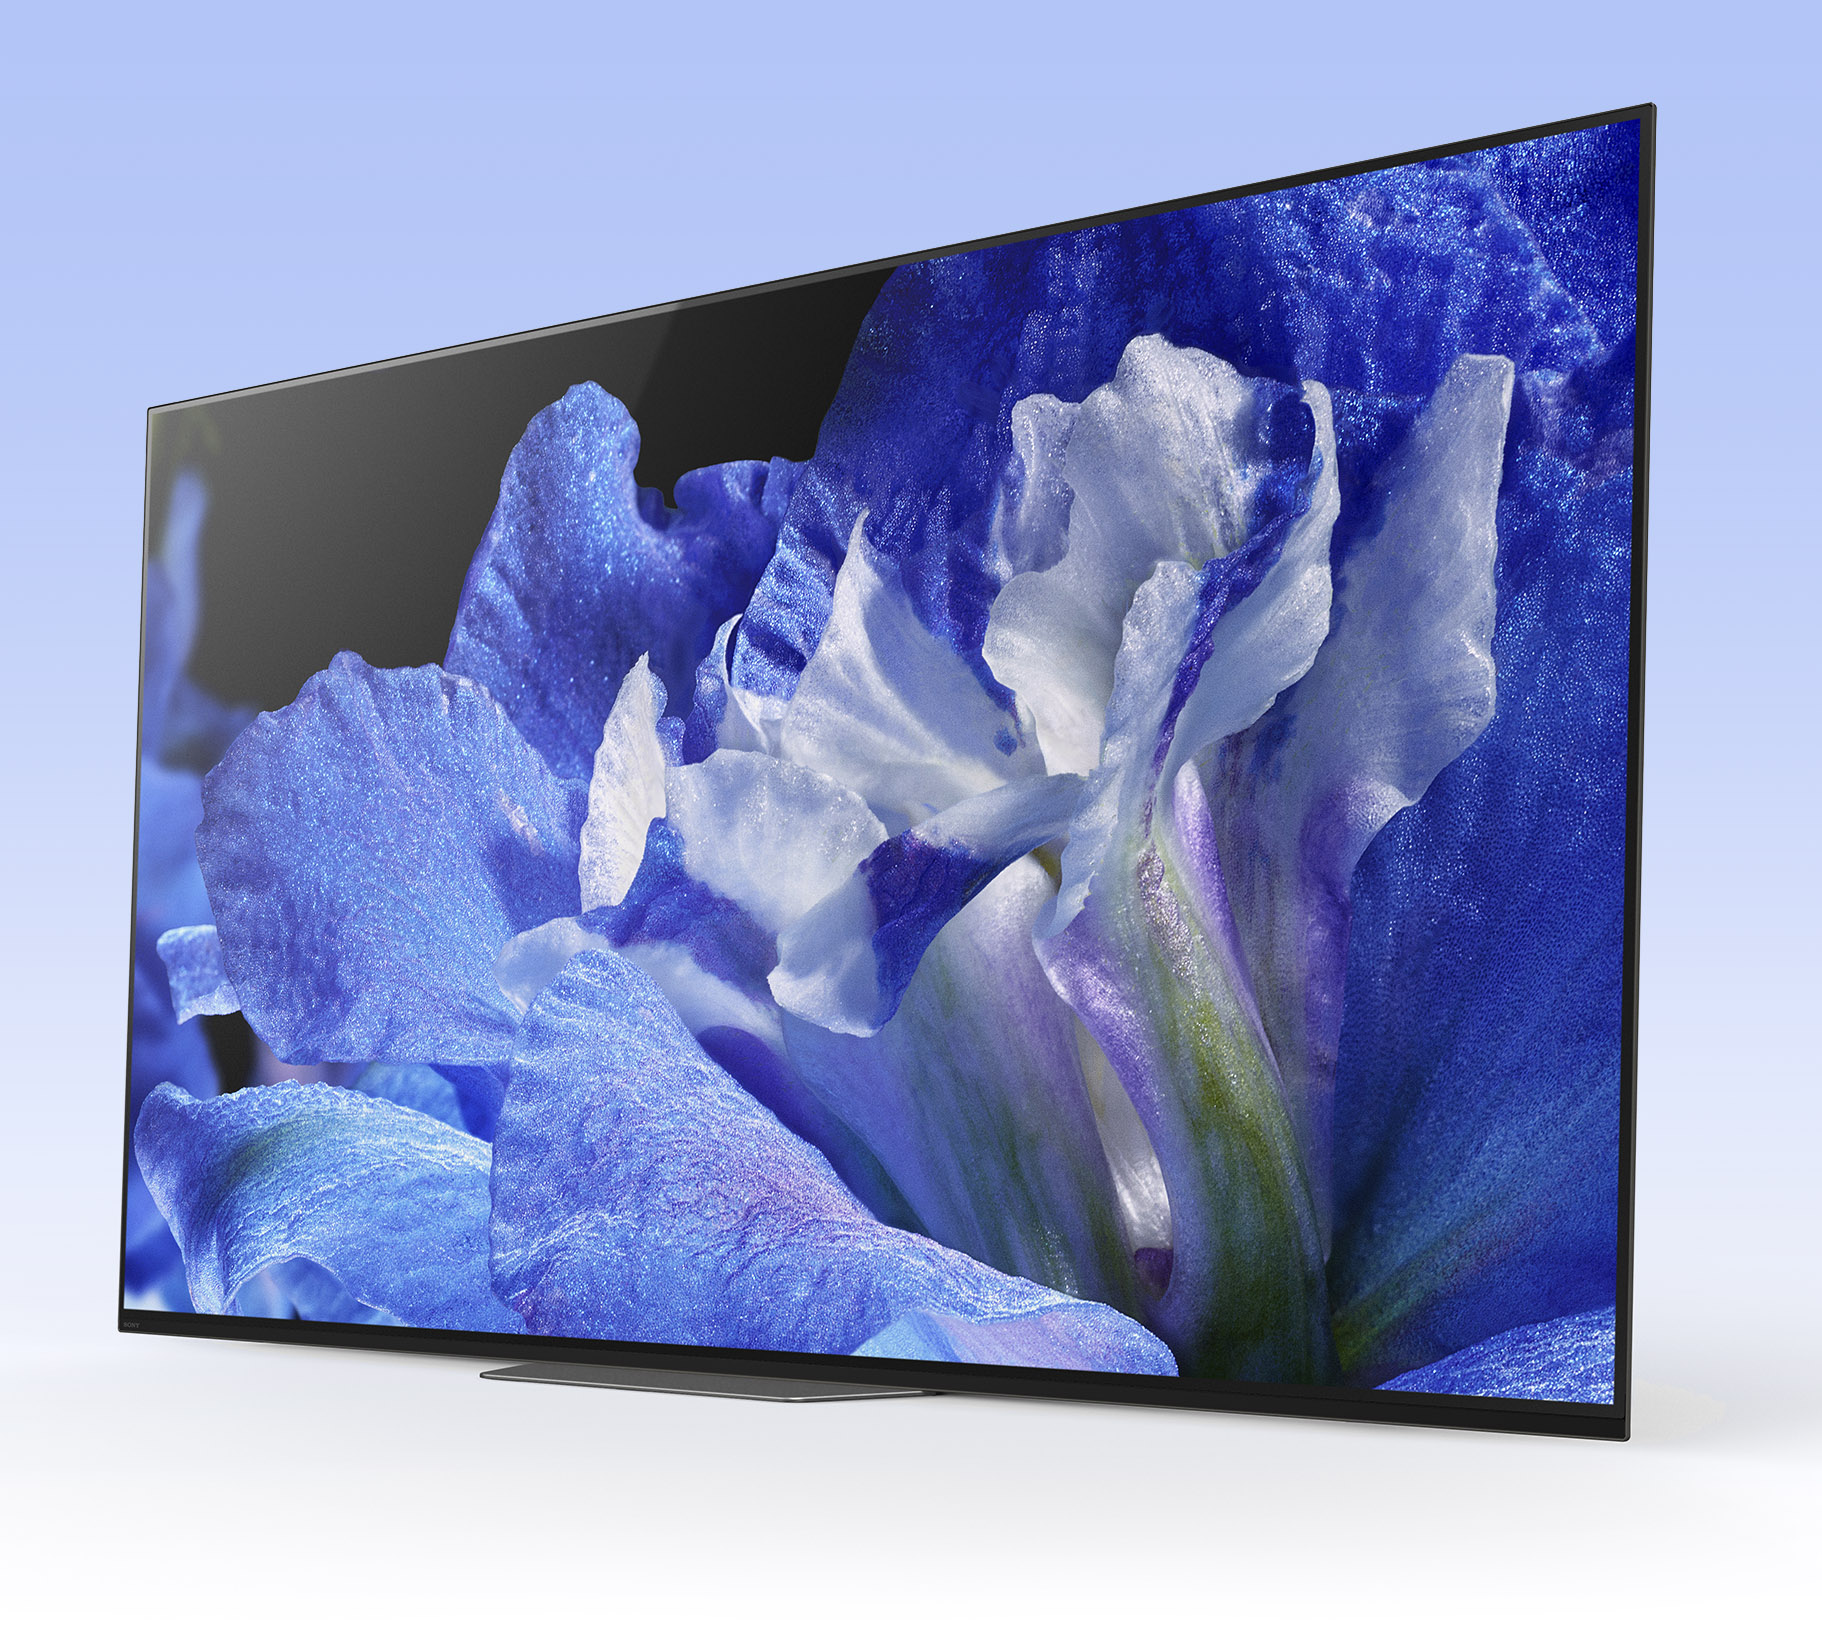 SONY BRAVIA unveils 2018 OLED and LED 4K HDR TV Series